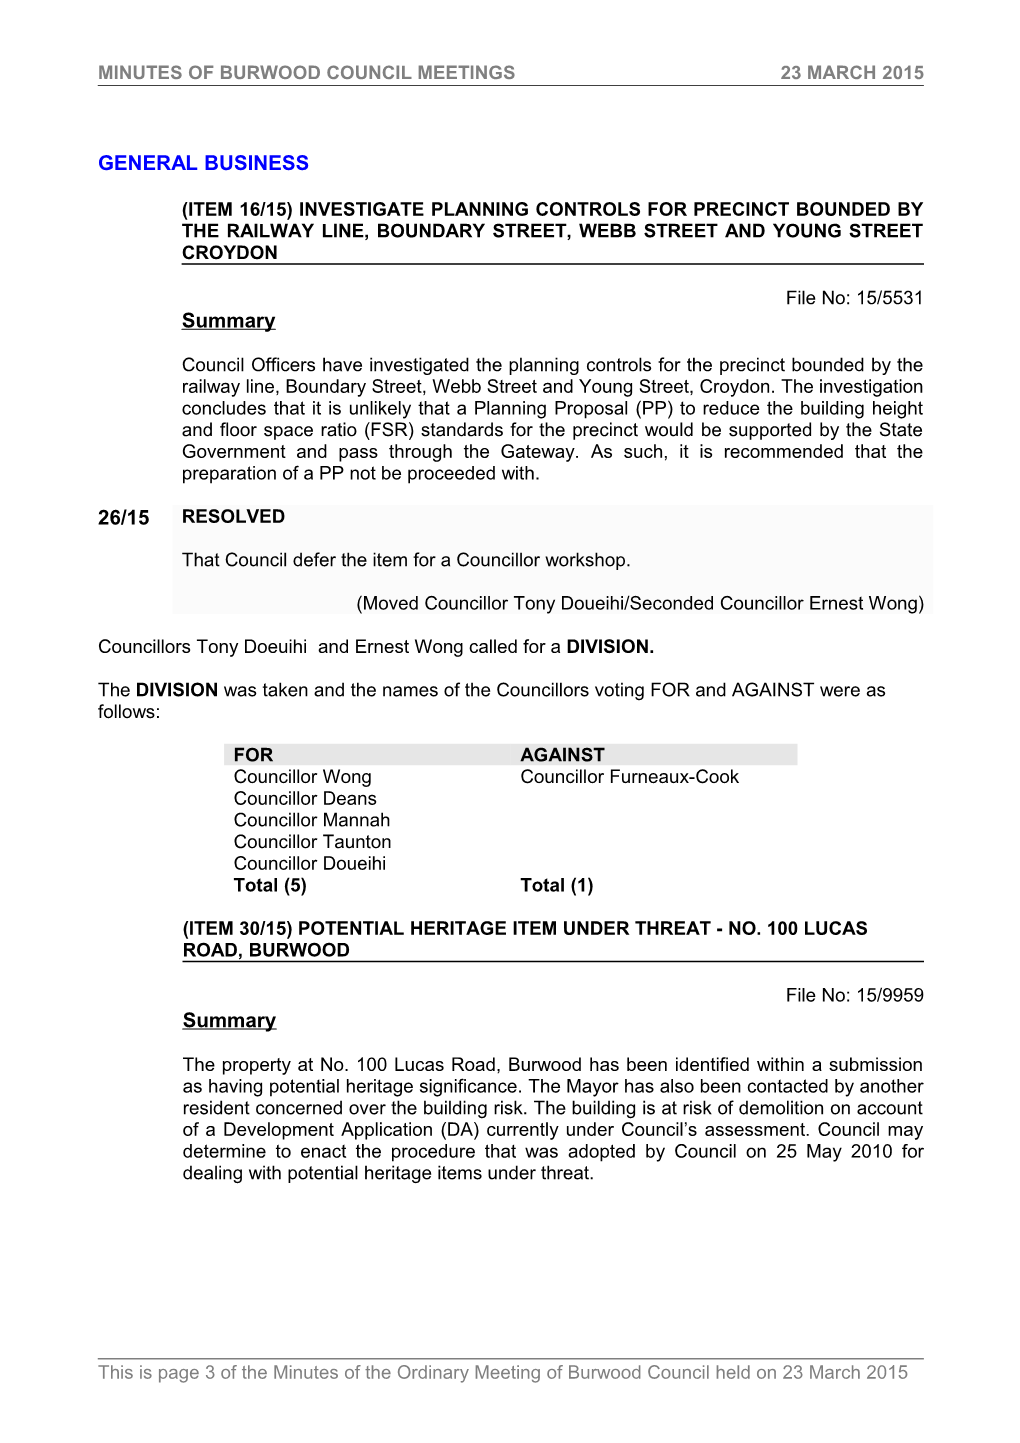 Pro-Forma Minutes of Burwood Council Meetings - 23 March 2015